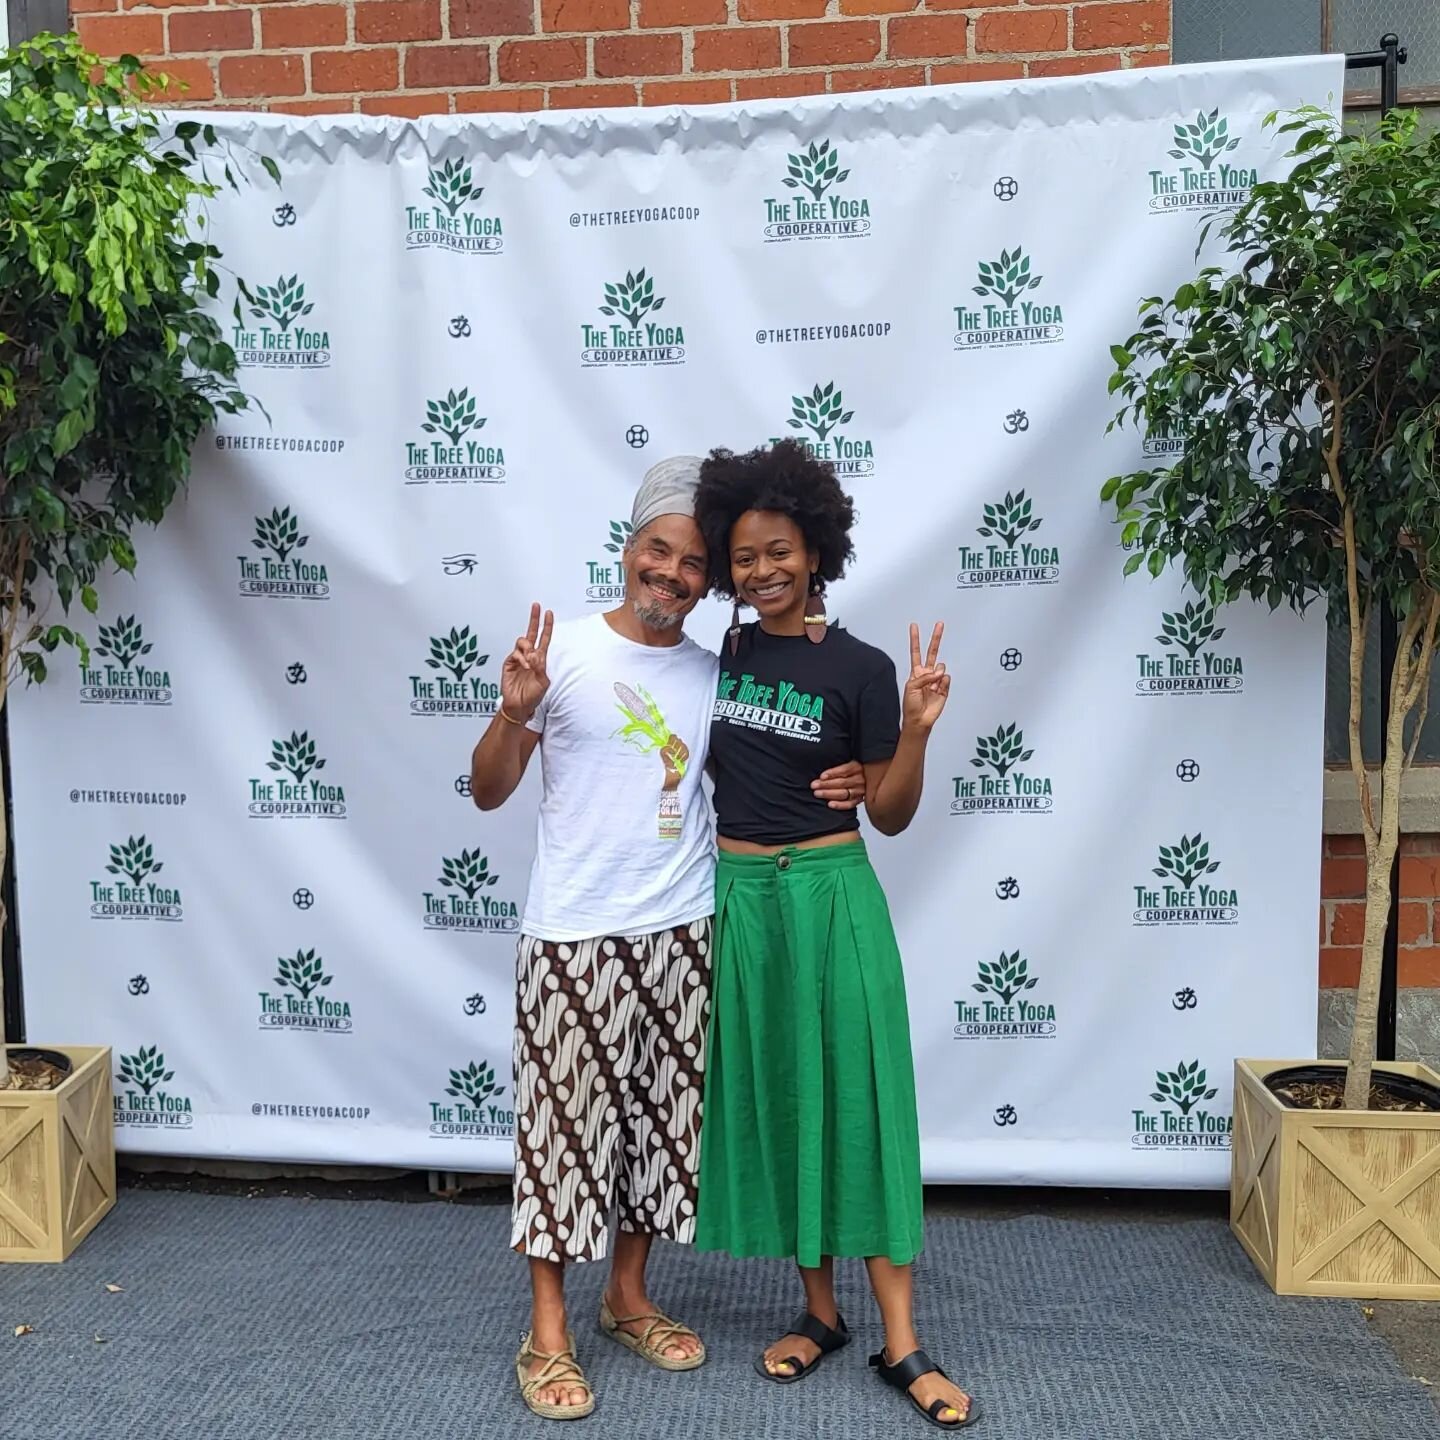 SoLA Food Co-op @ the opening  of the Tree of Yoga Co-op
What an AMAZING, BEAUTIFUL Space.
#economicdevelopment #economicempowerment #cooplife